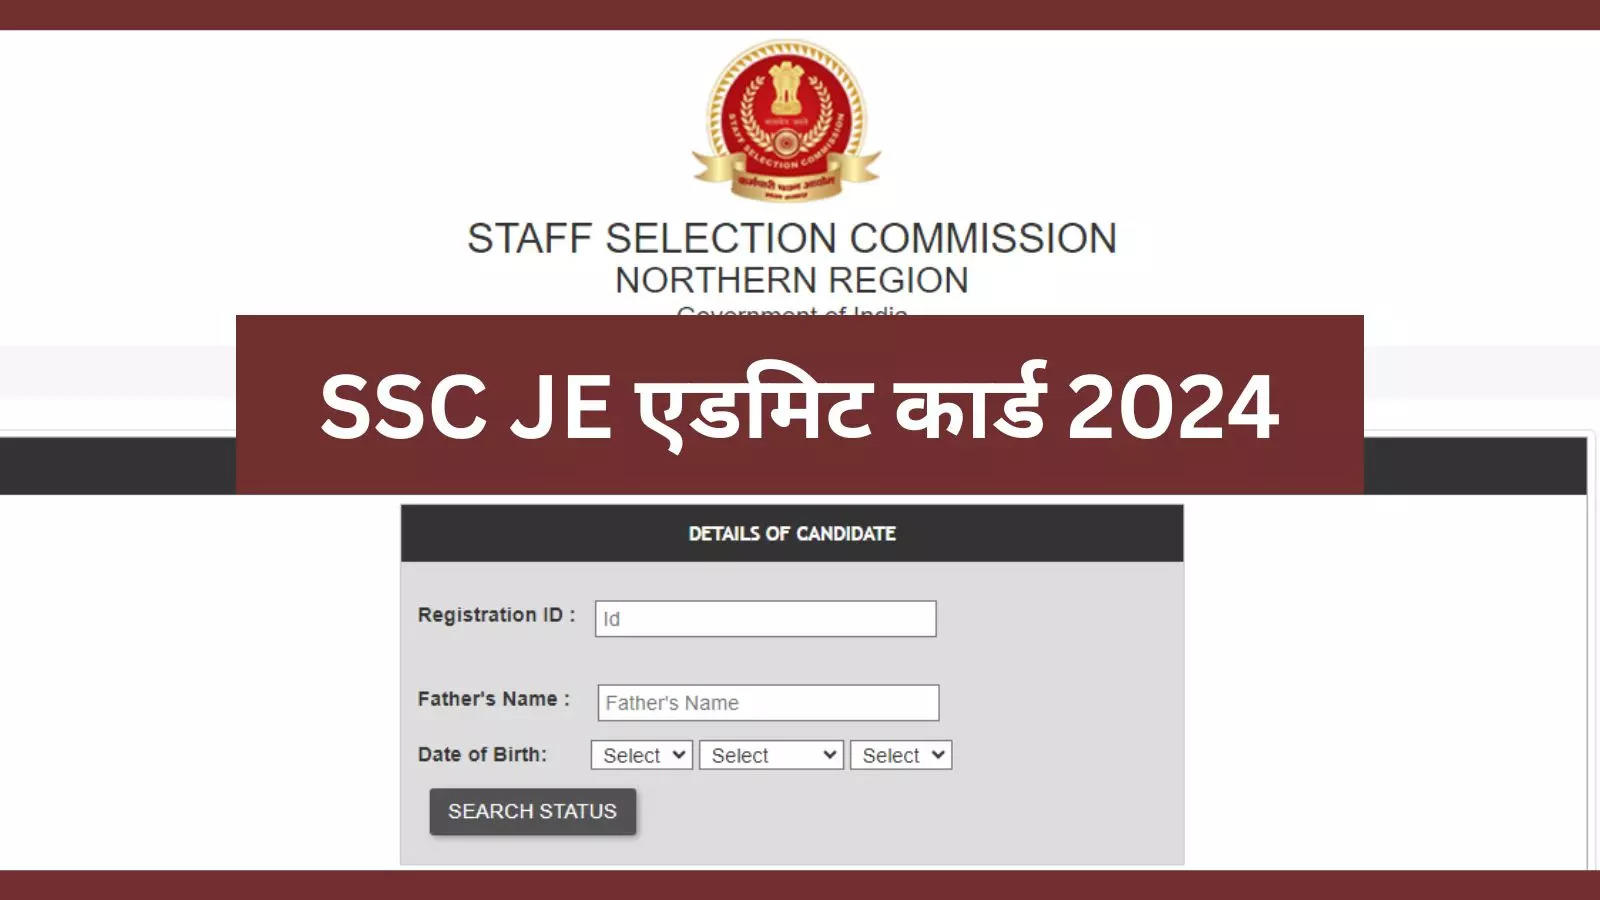 SSC JE Admit Card 2024: SSC JE Admit Card released, here is the region wise hall ticket download link